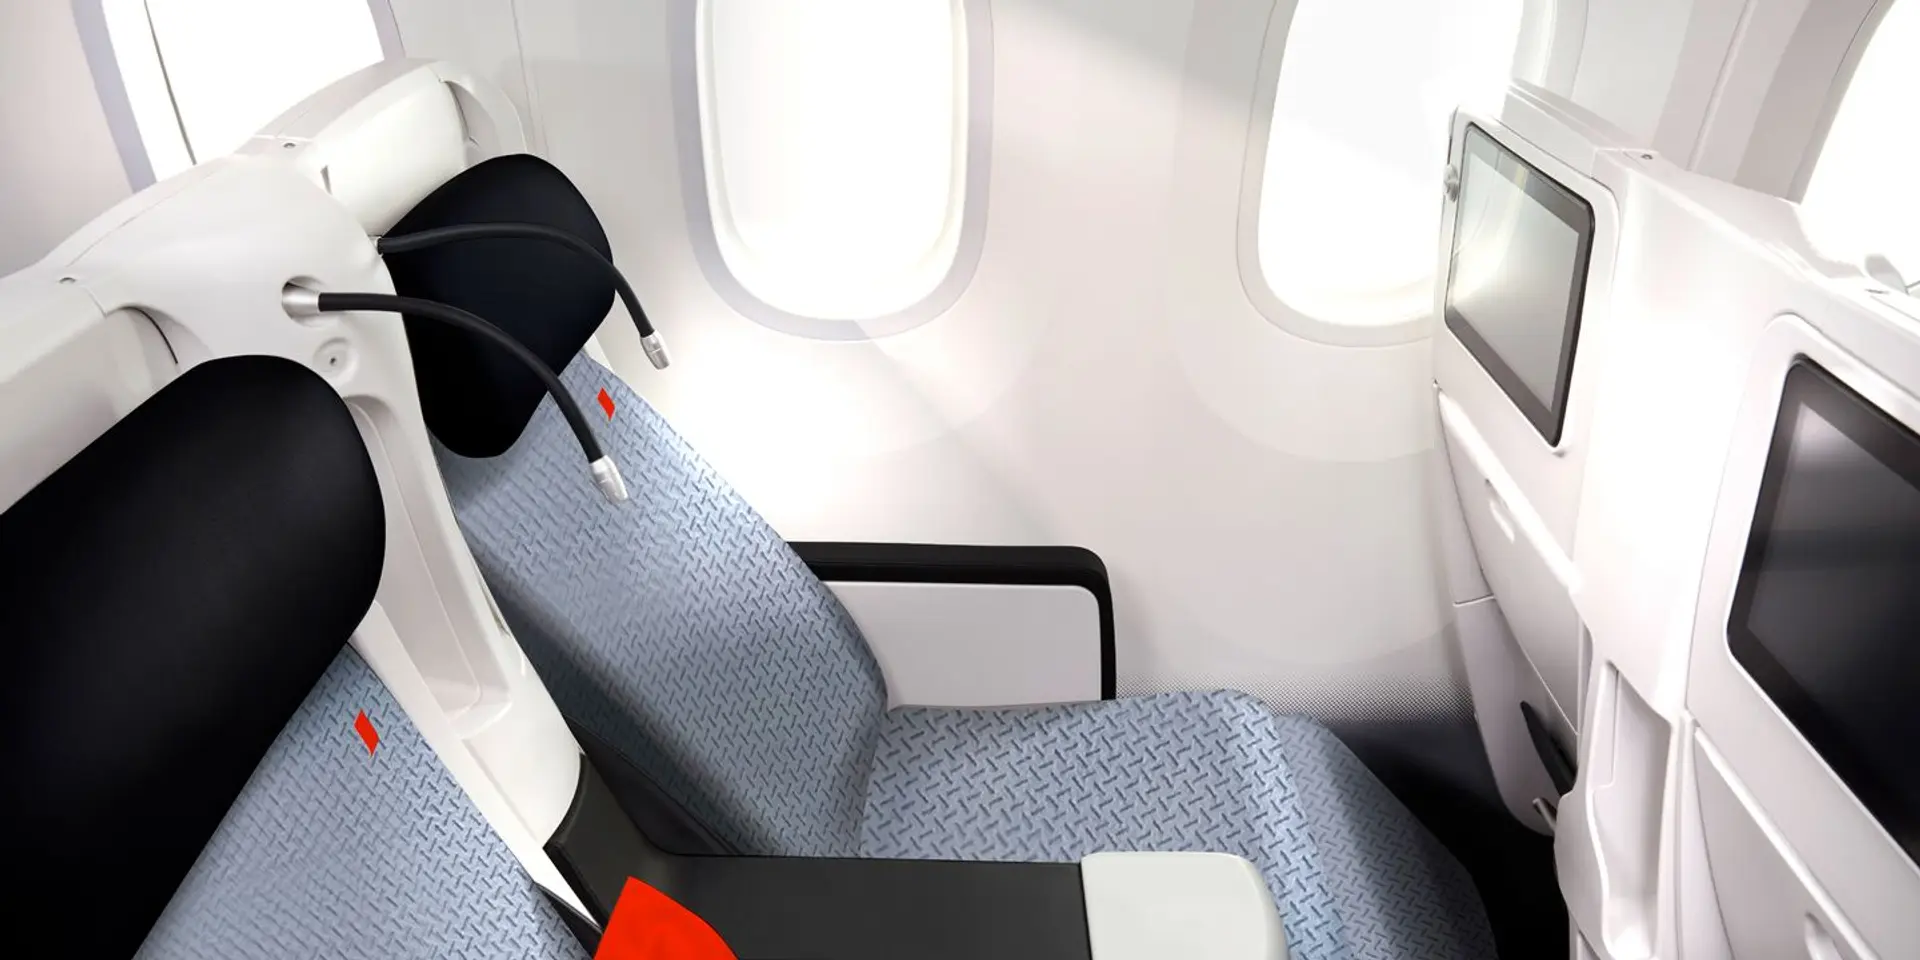 Airlines News - Air France flies new Business Class on long-haul Boeing 777-300ER